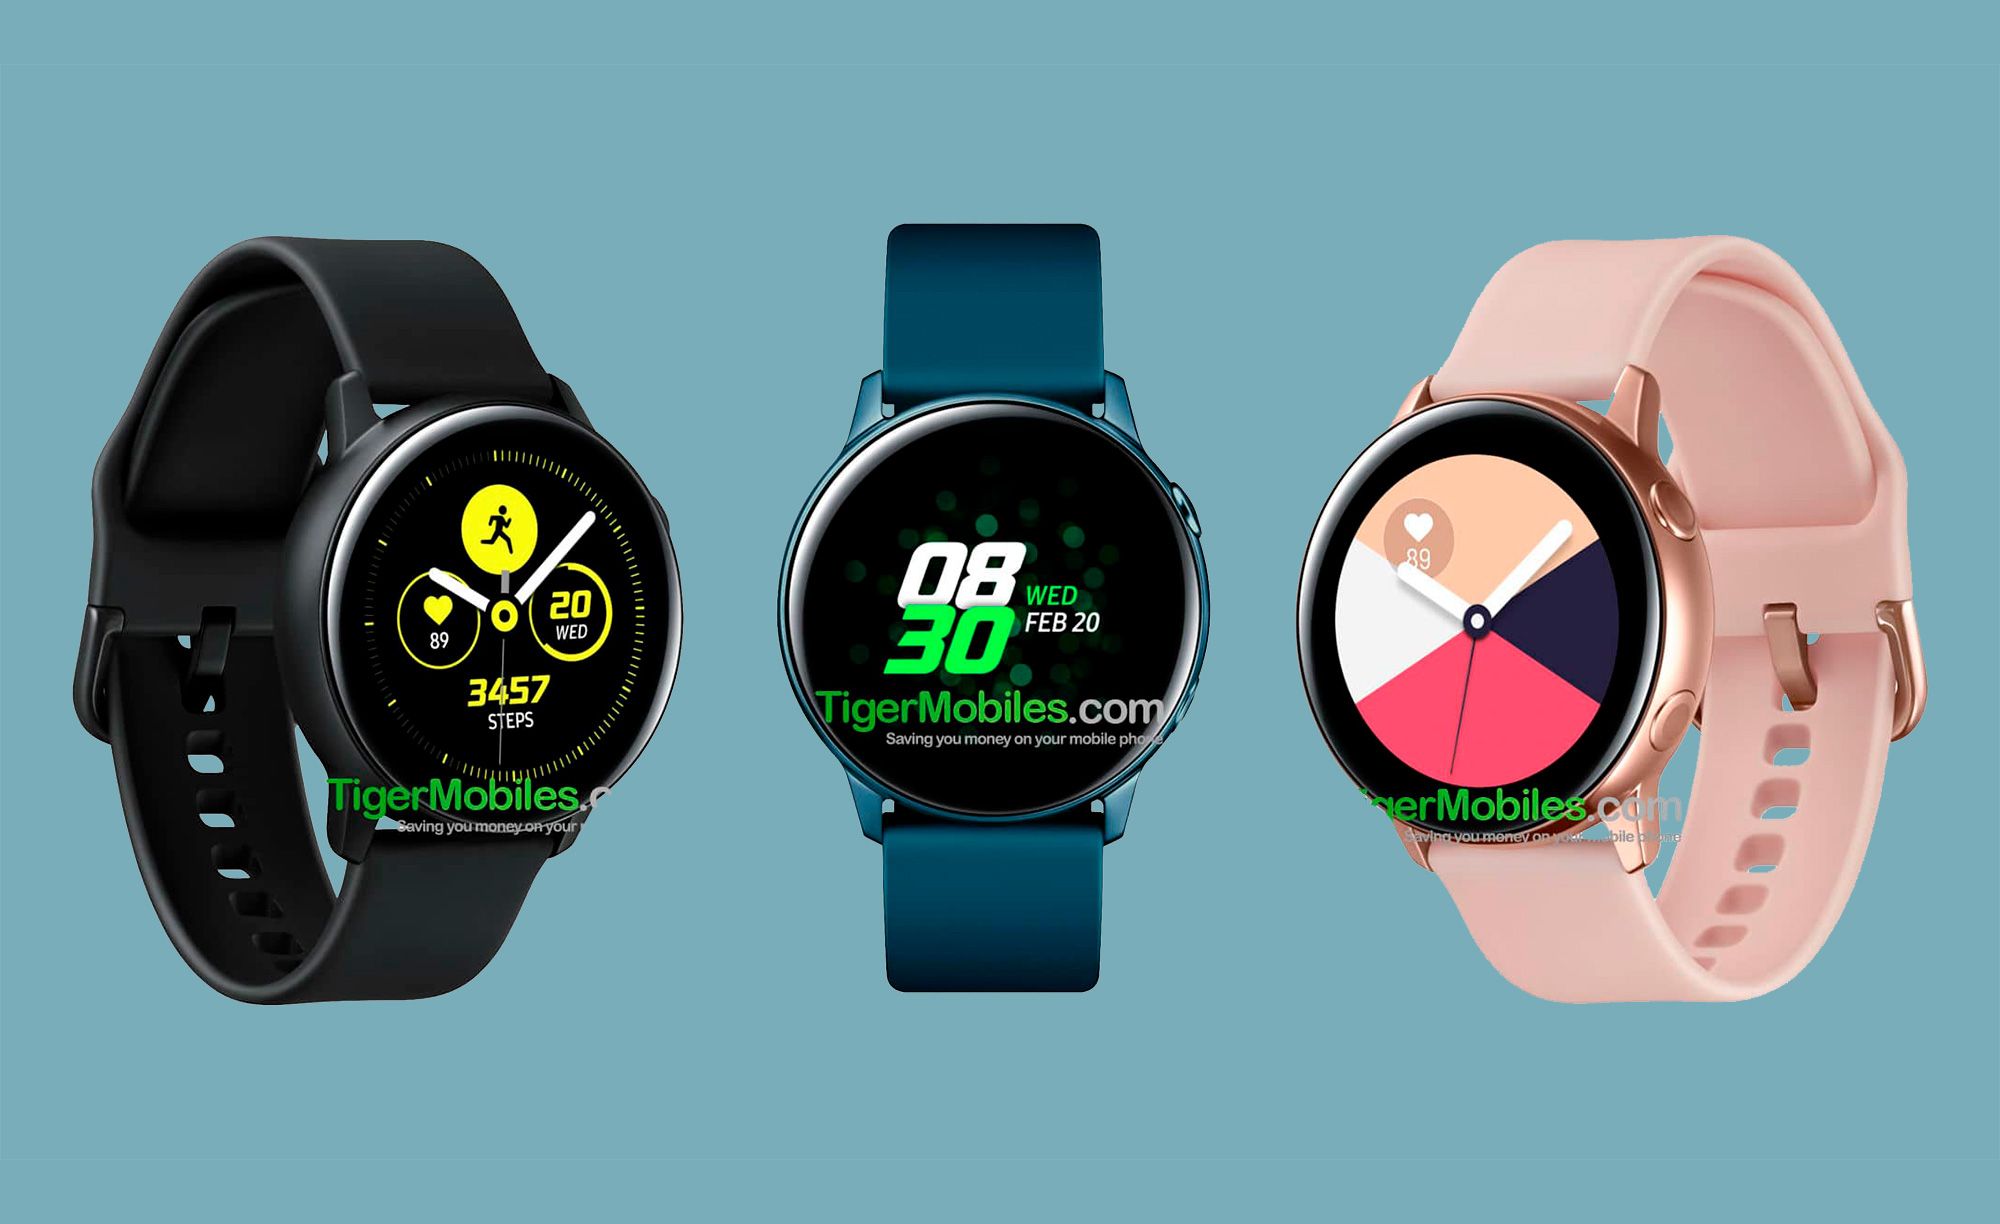 Galaxy Watch Active 2: The new most comprehensive Samsung watch officially presented